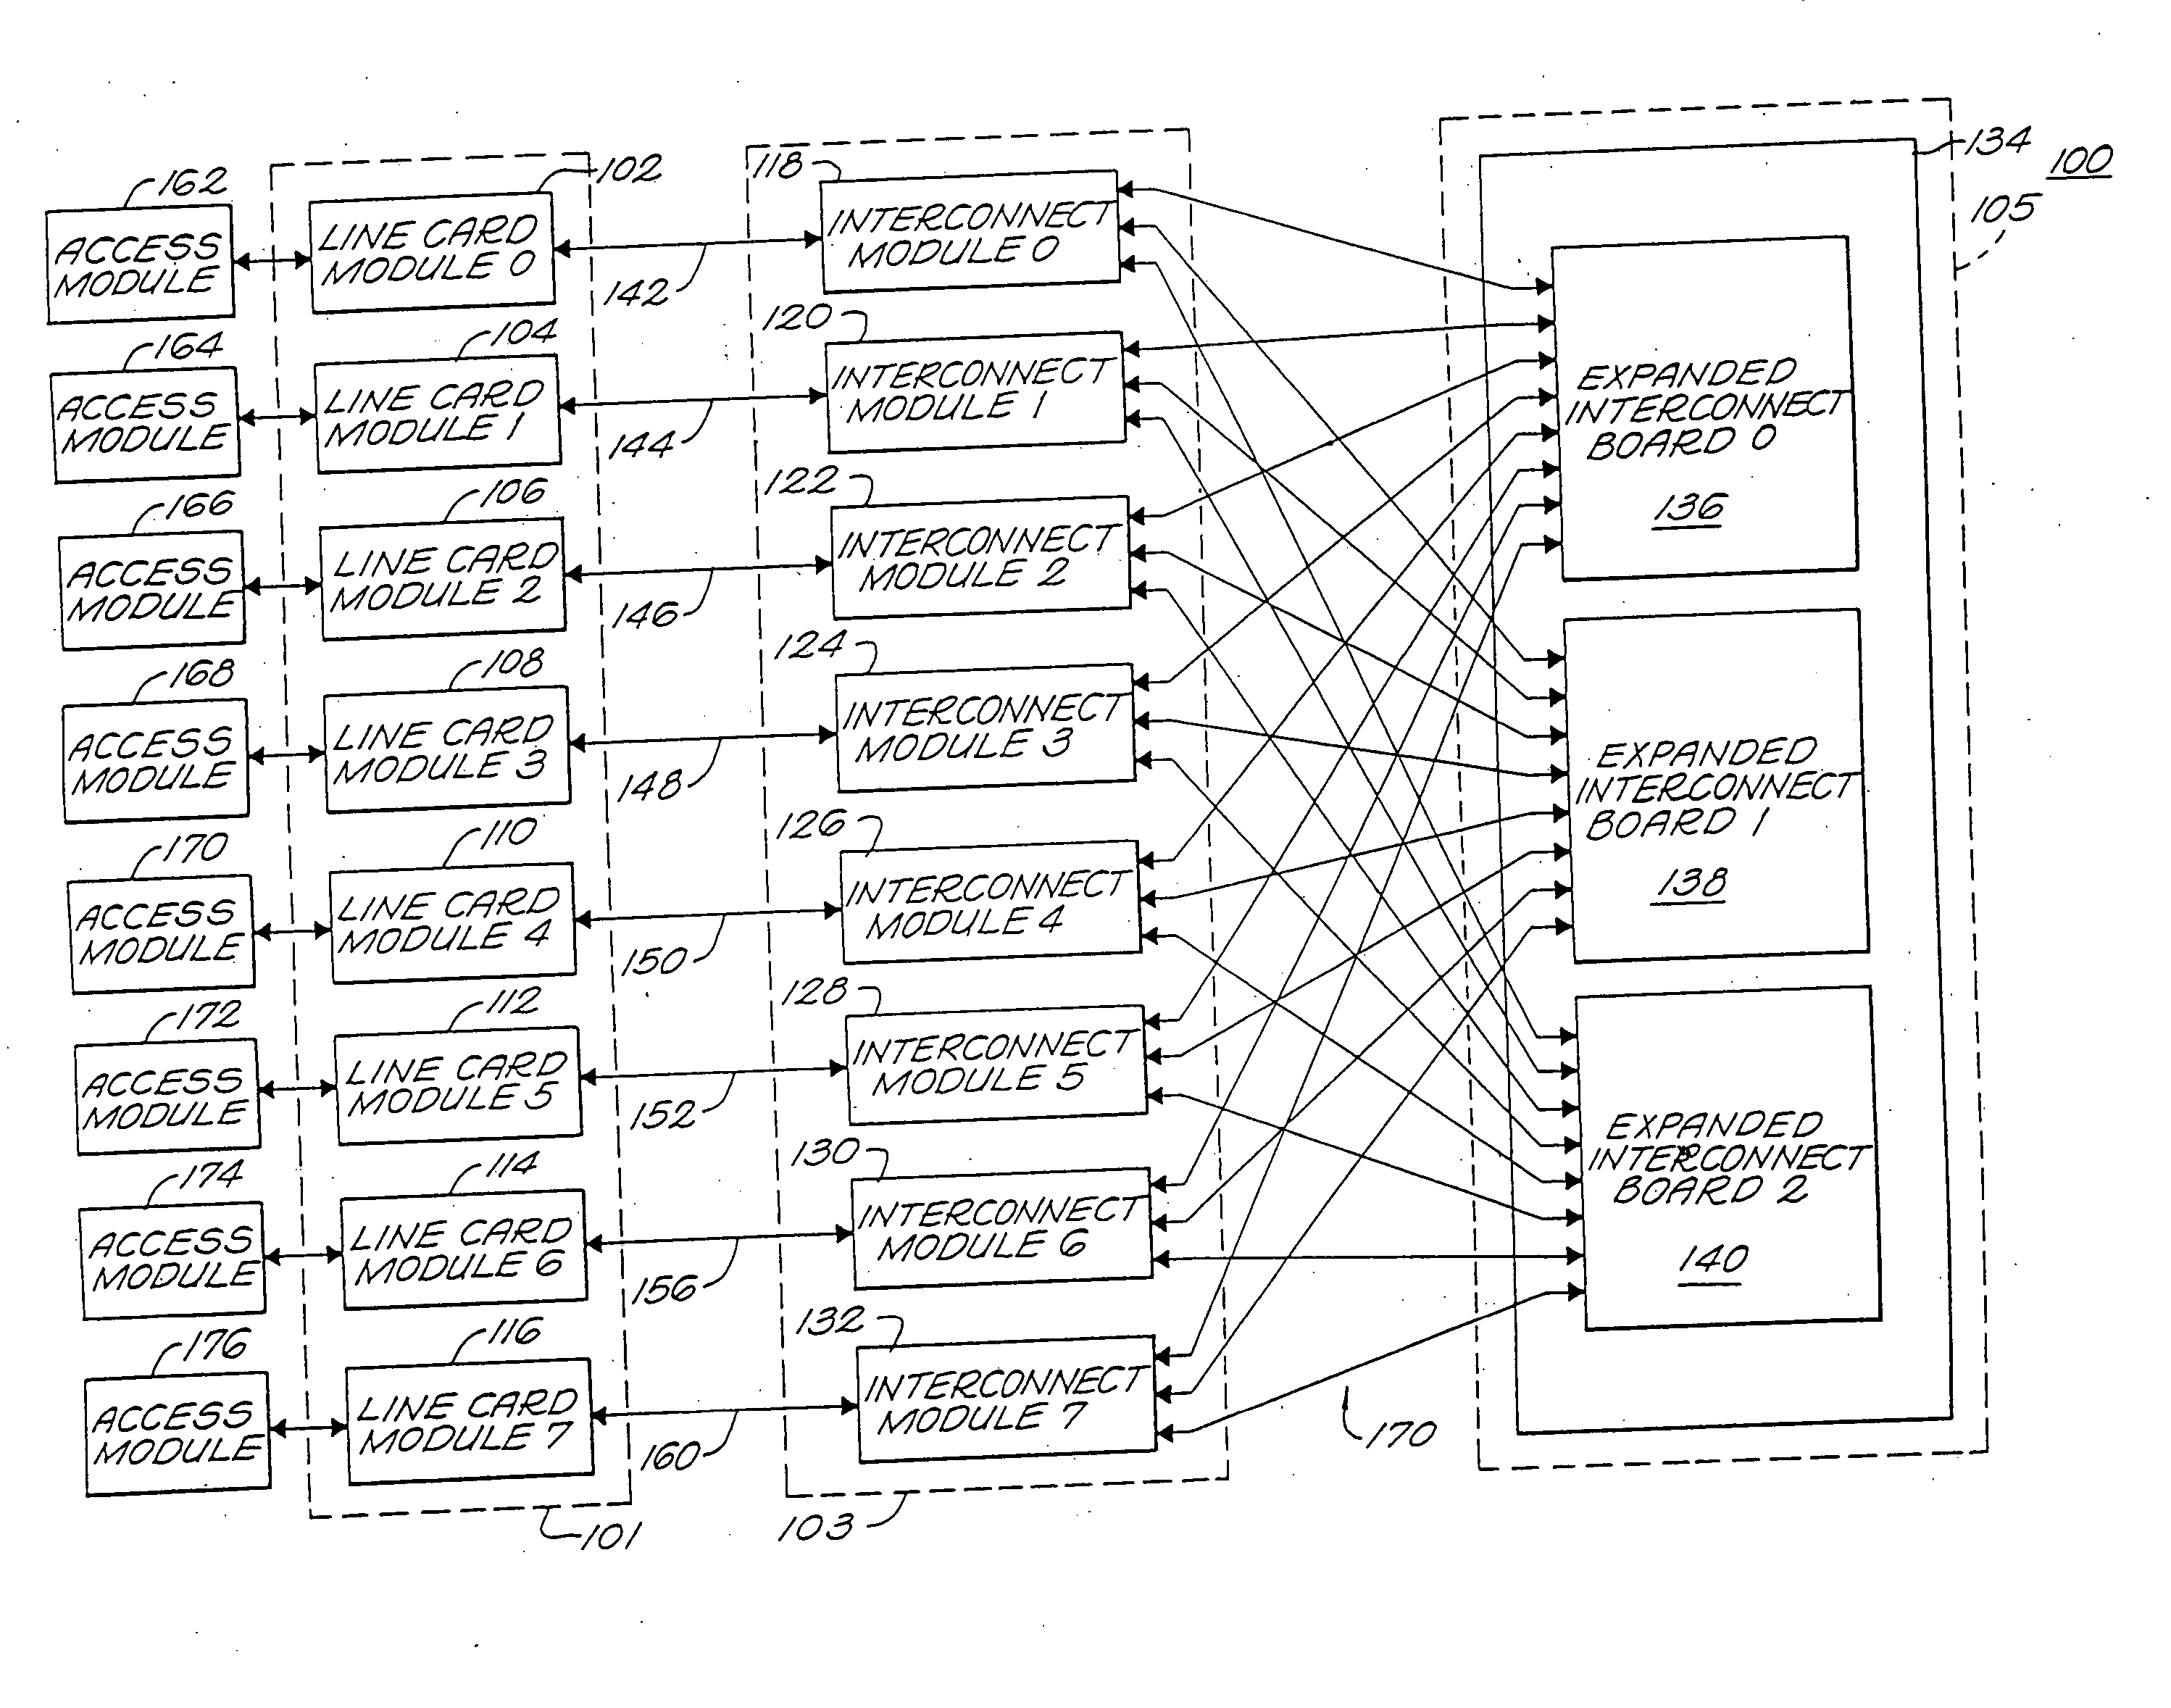 Interconnect network for operation within a communication node